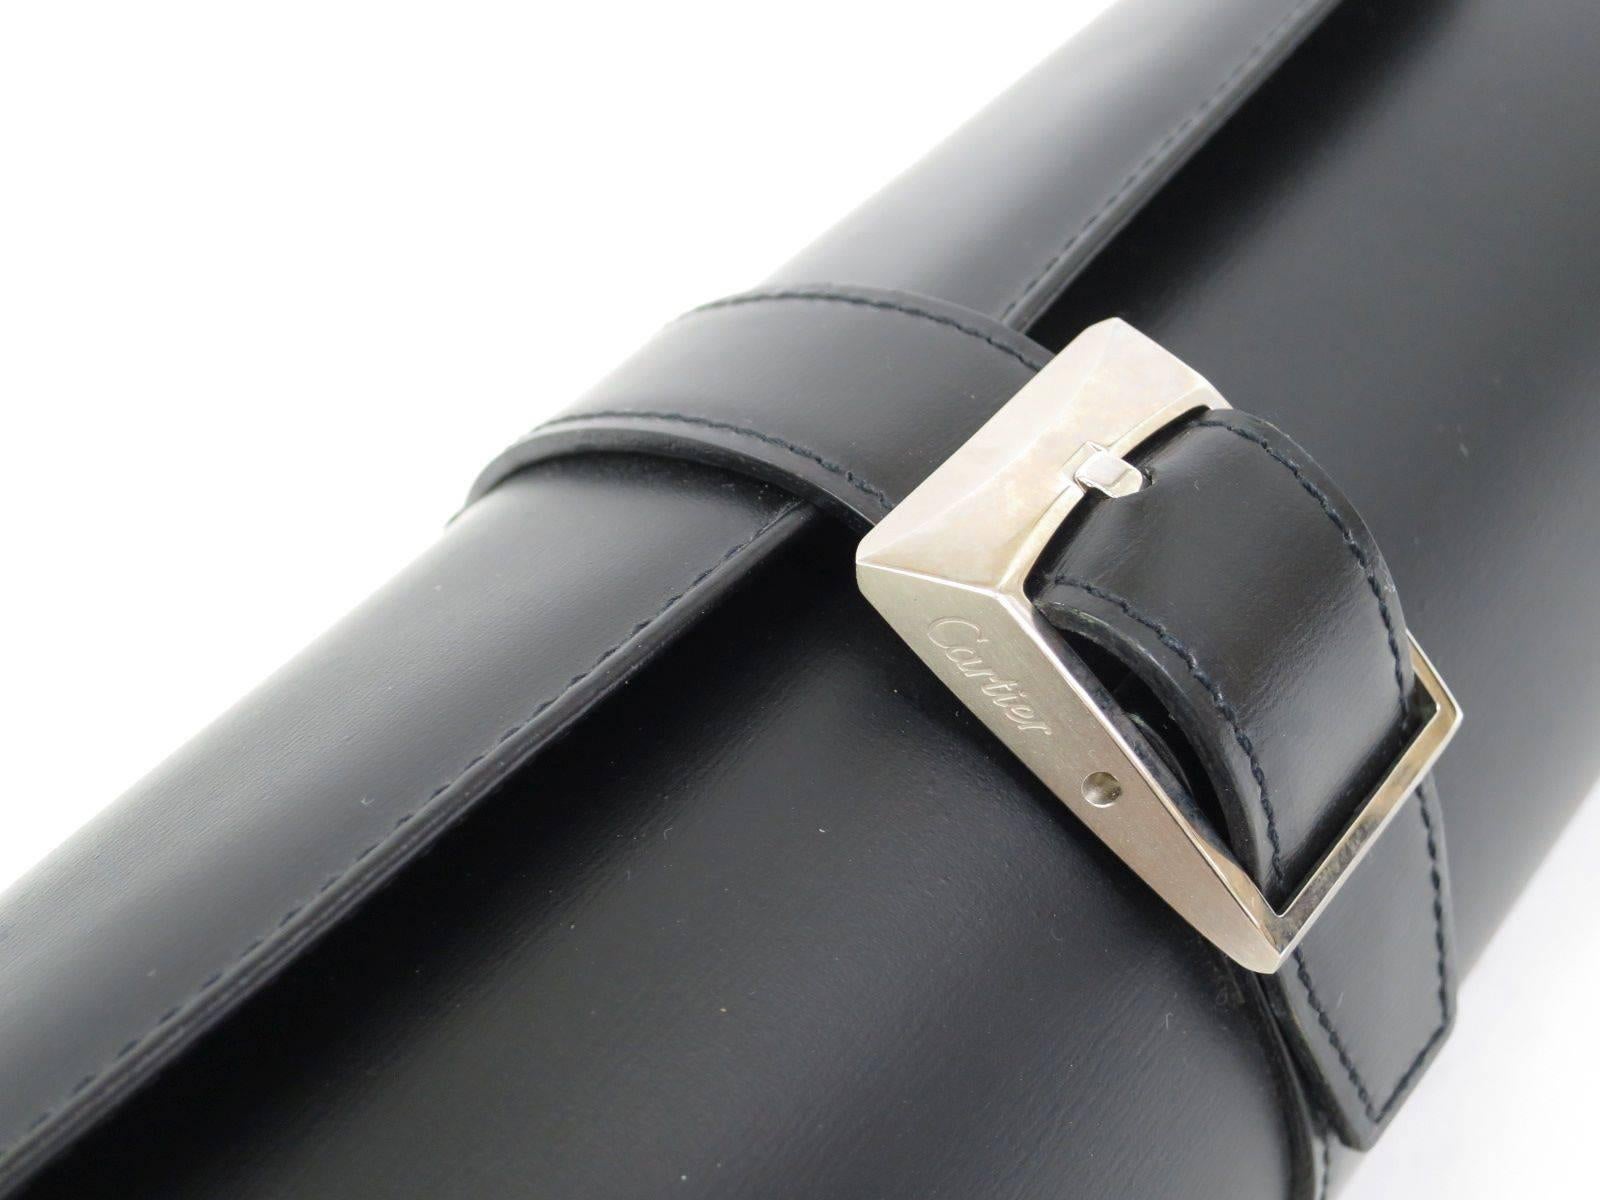 CURATOR'S NOTES

Cartier Black Leather Silver Hardware Travel Watch Storage Case Roll Bag  


Leather
Silver hardware
Velvet lining
Buckle closure
Measures 9" W x 3" H x 3" D 